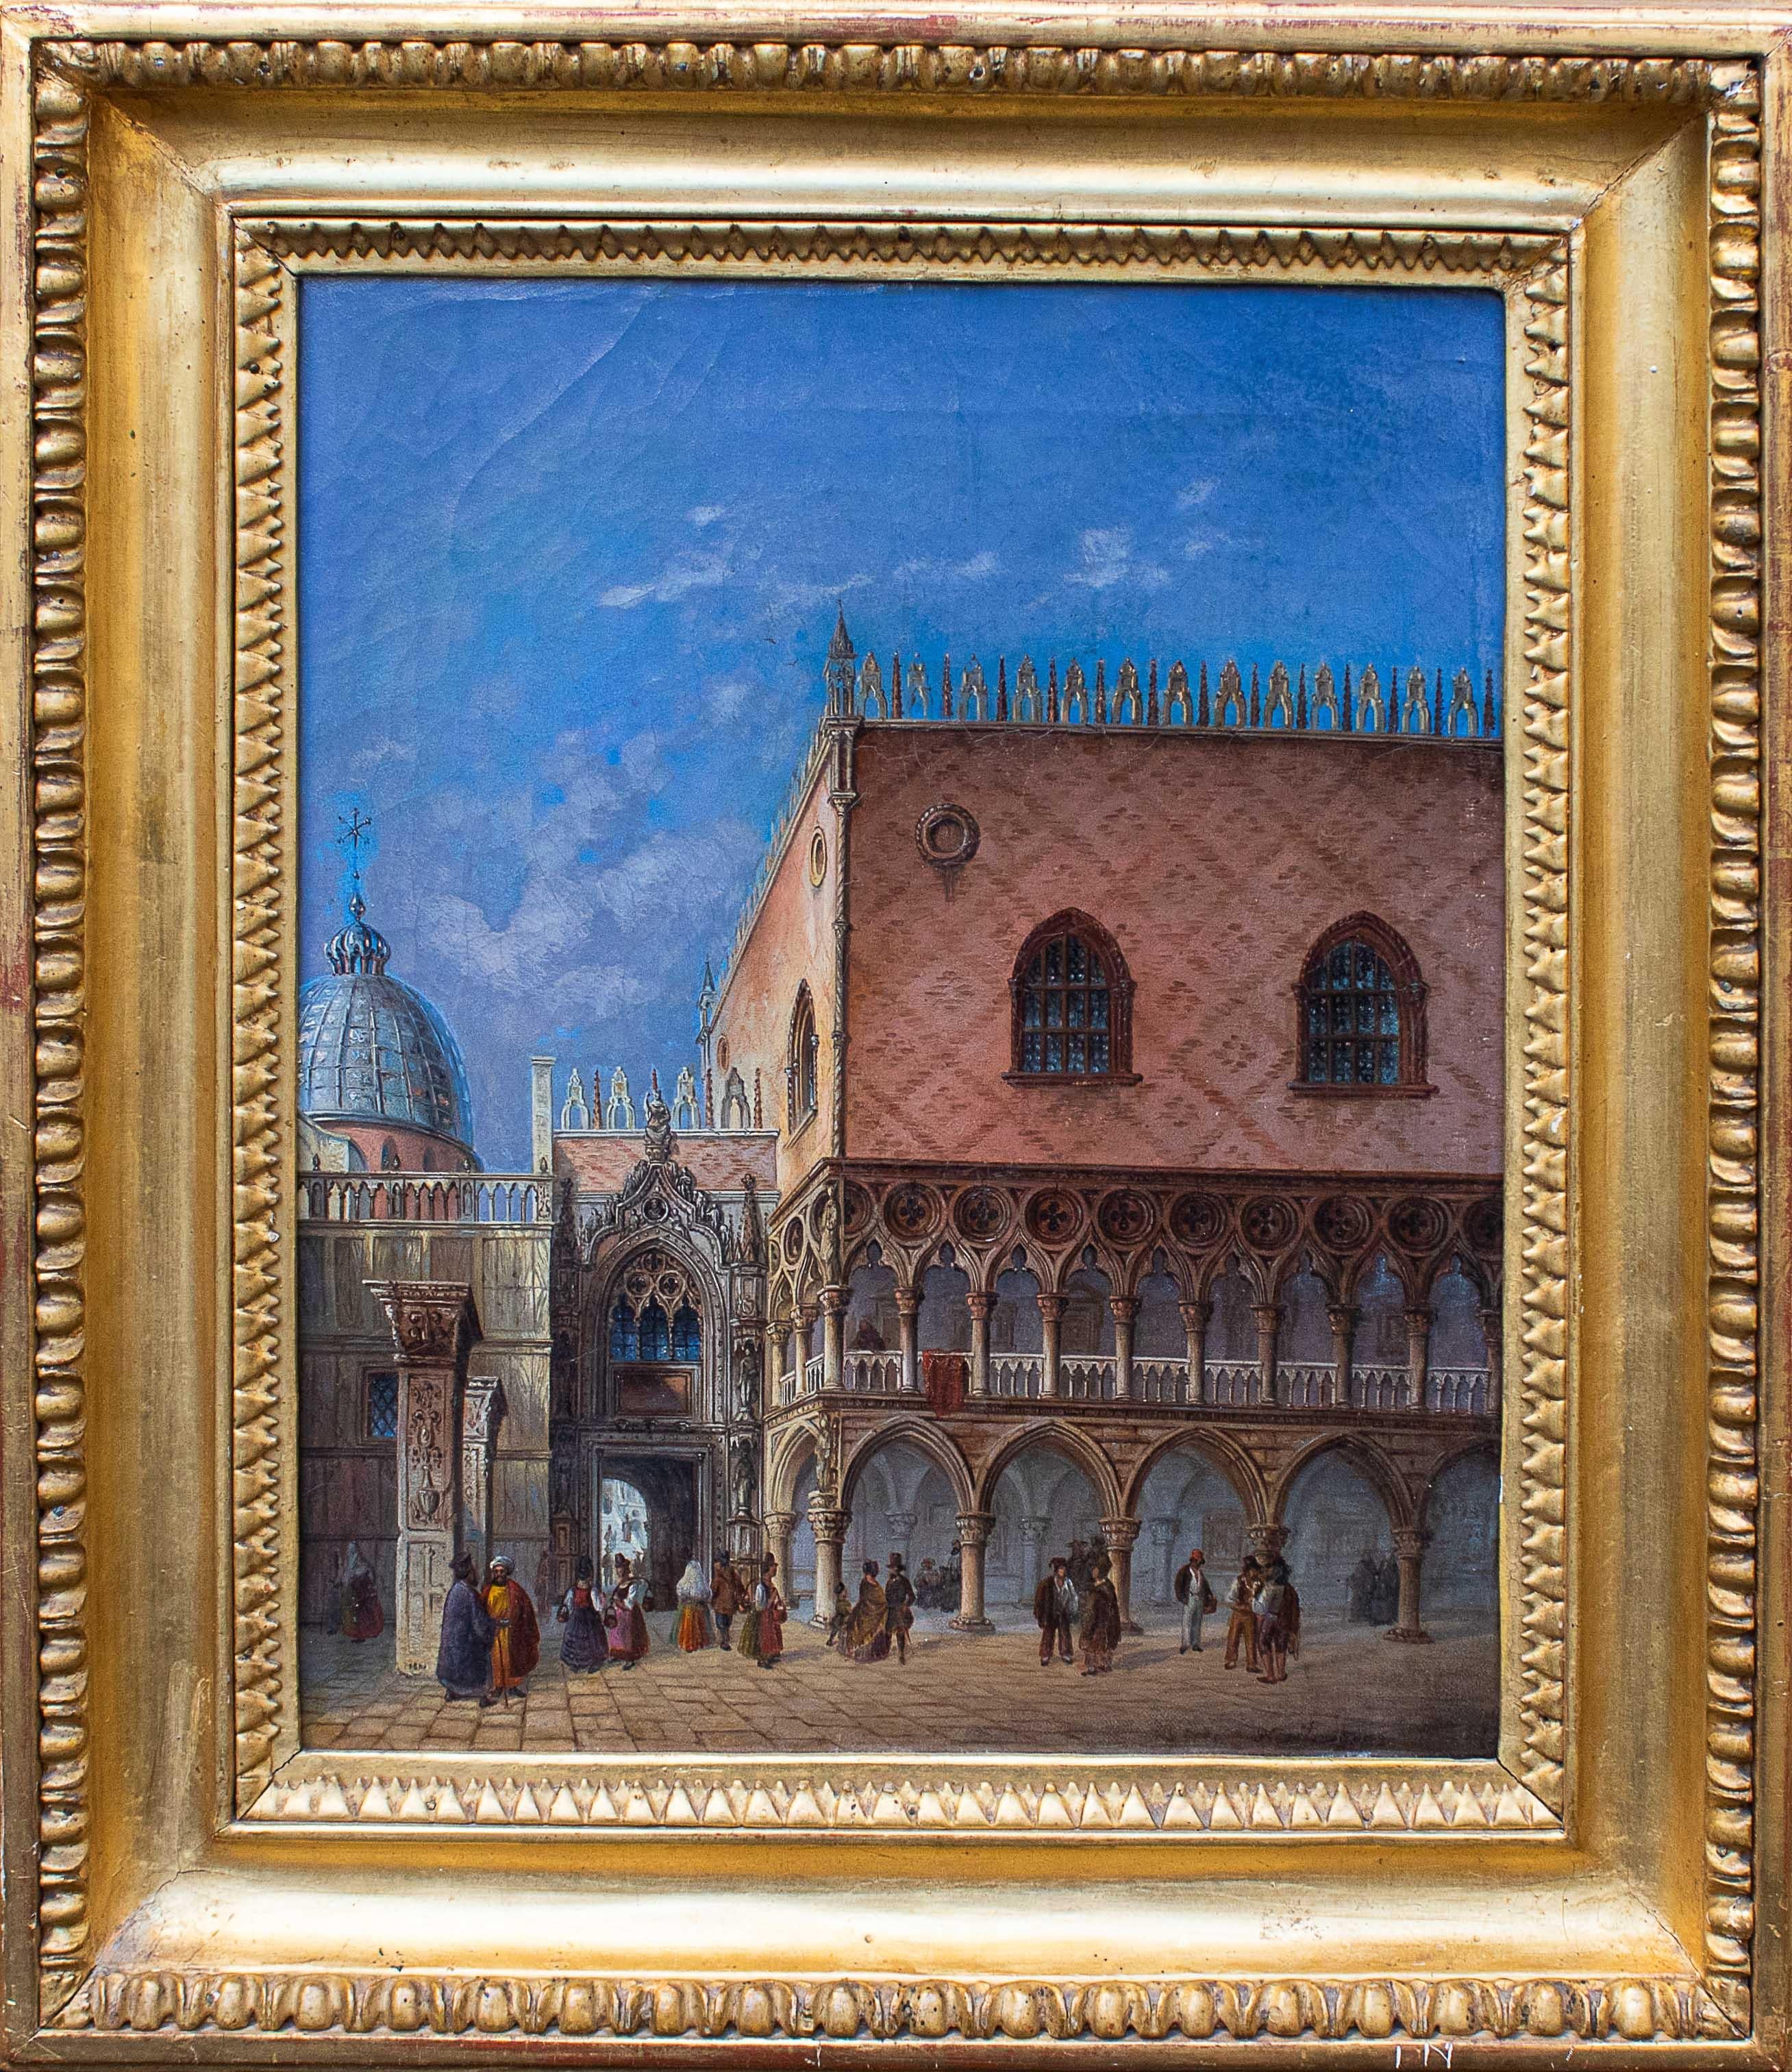 Johann Baptist Kreitmayr (1819 Munich -1879 Ebenda)
View of the Doge's palace in Venice, 1848
Oil on canvas, 35.4 x 28.5 cm - with frame, 47 x 40 cm

The painting under consideration depicts a glimpse of the facade of the Doge's Palace in Venice,